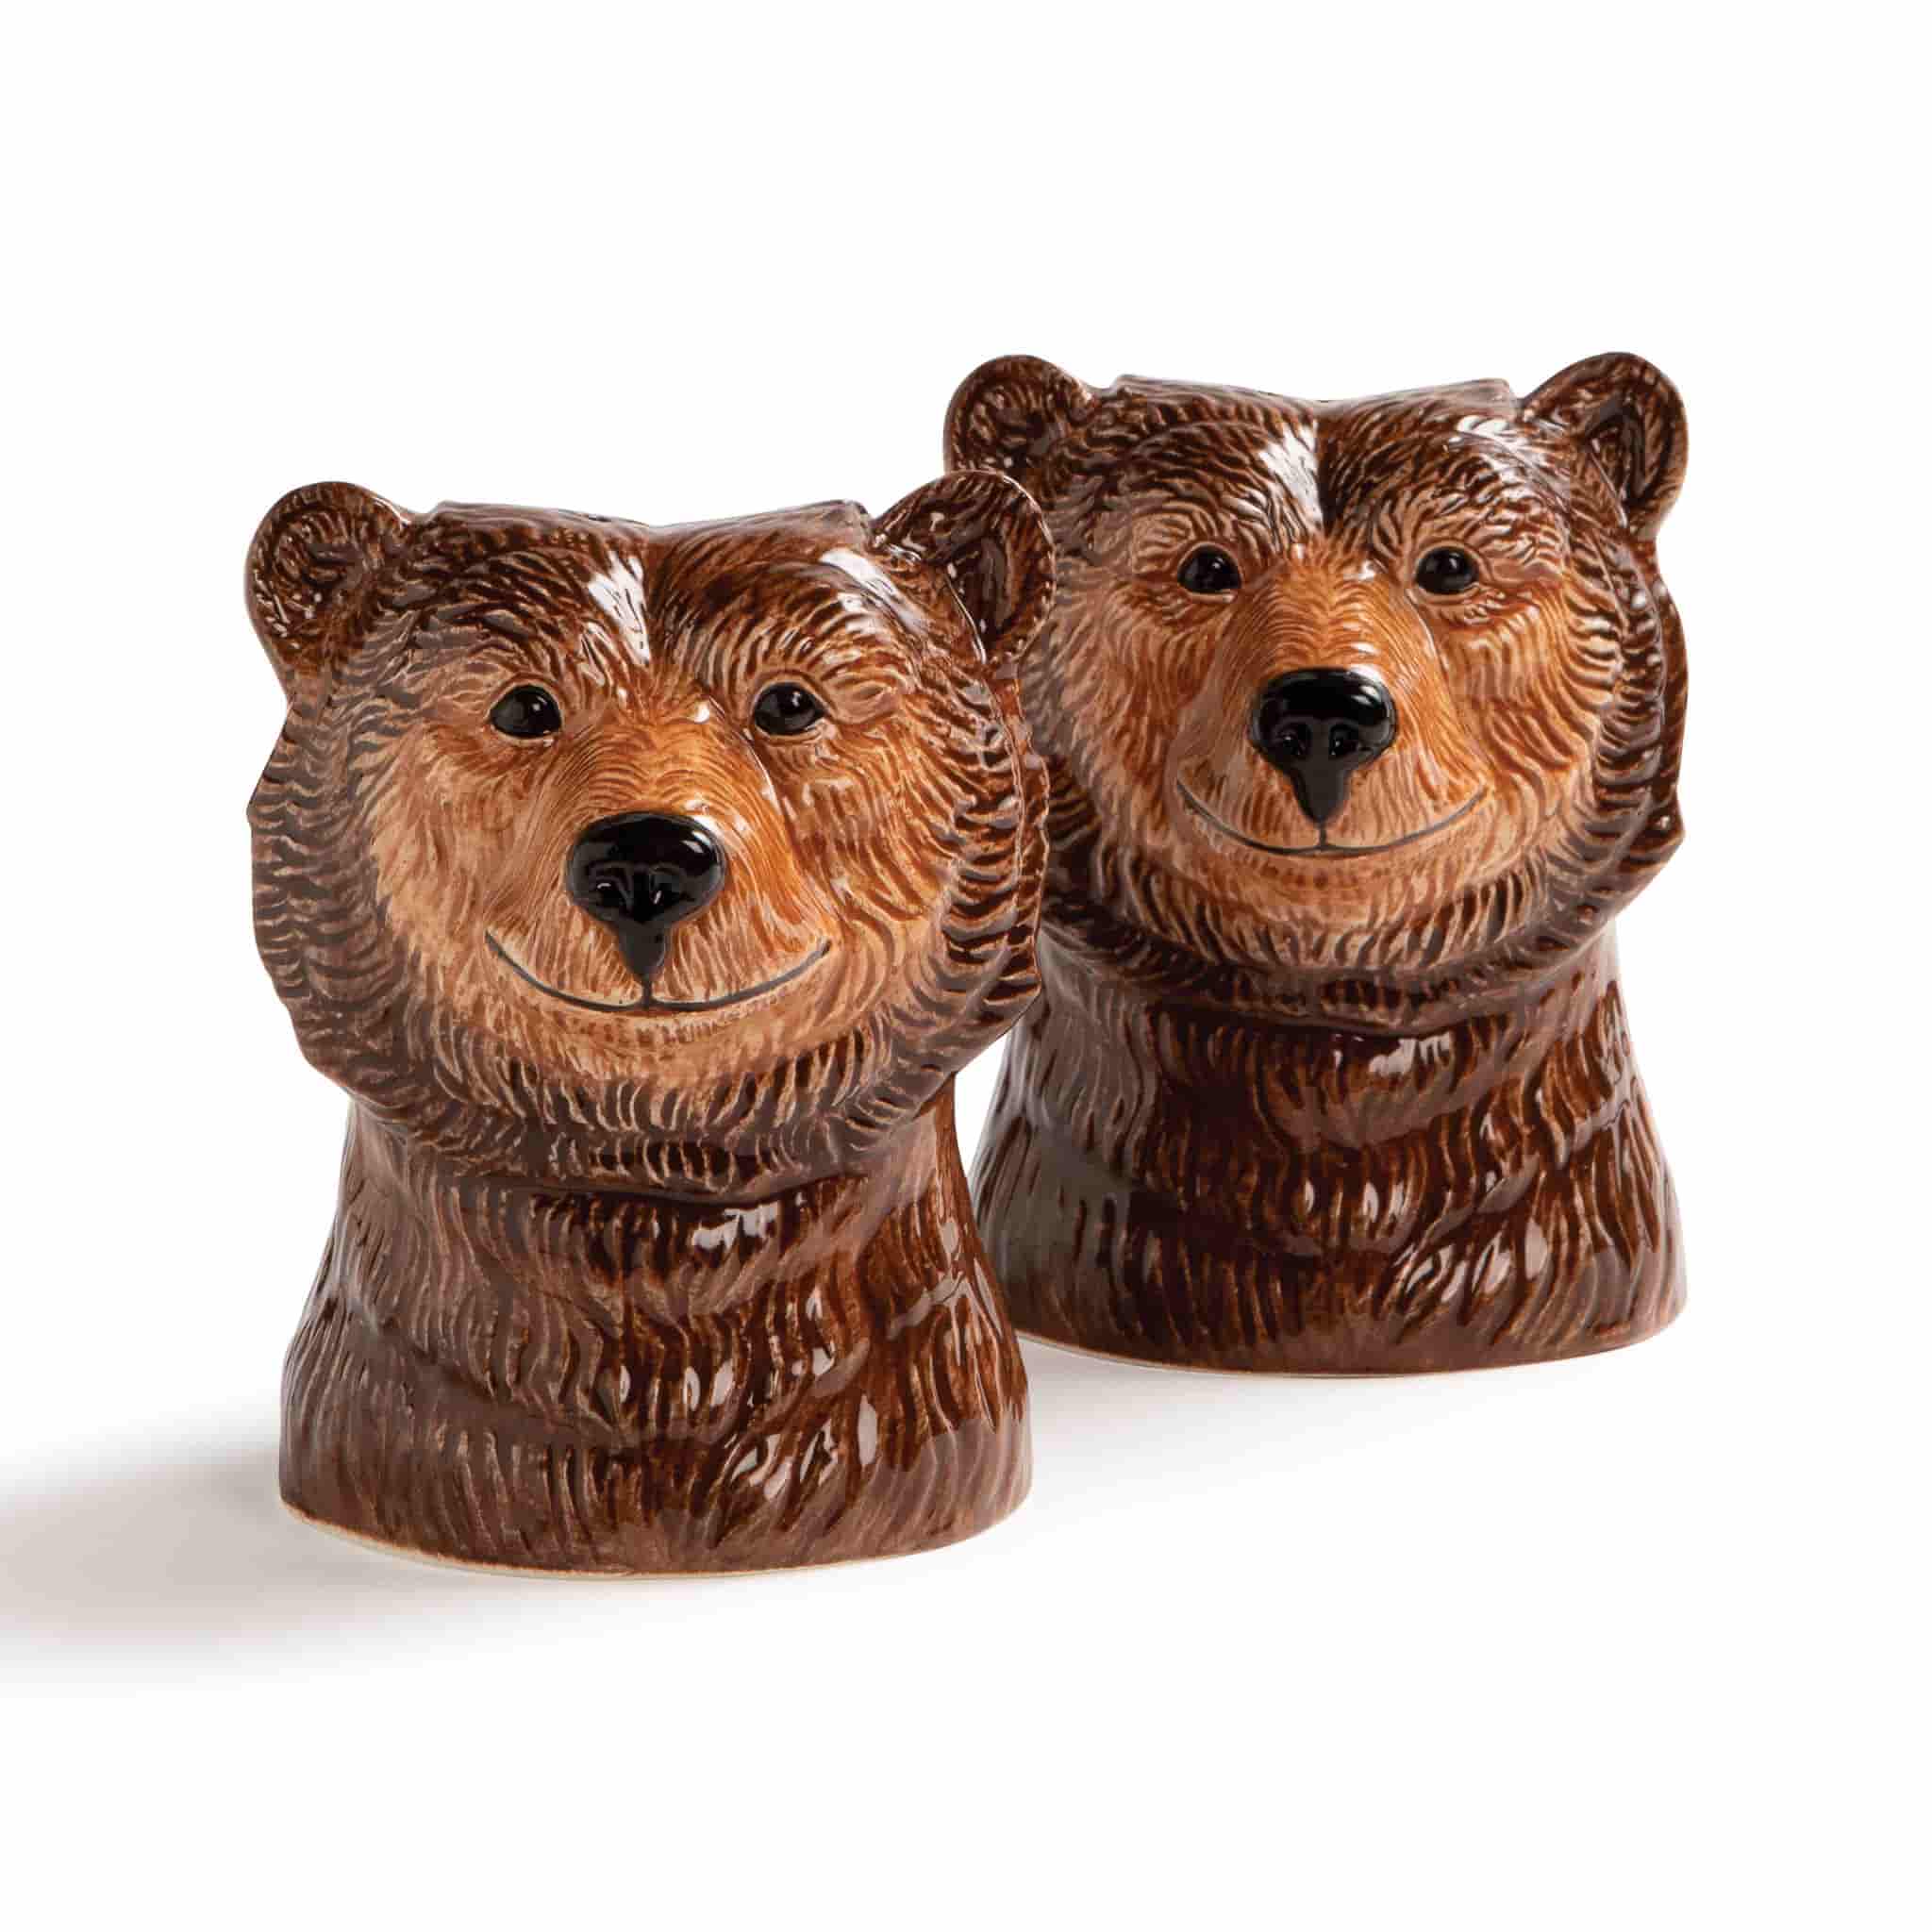 Set of 2 Grizzly Bear Salt and Pepper Shakers